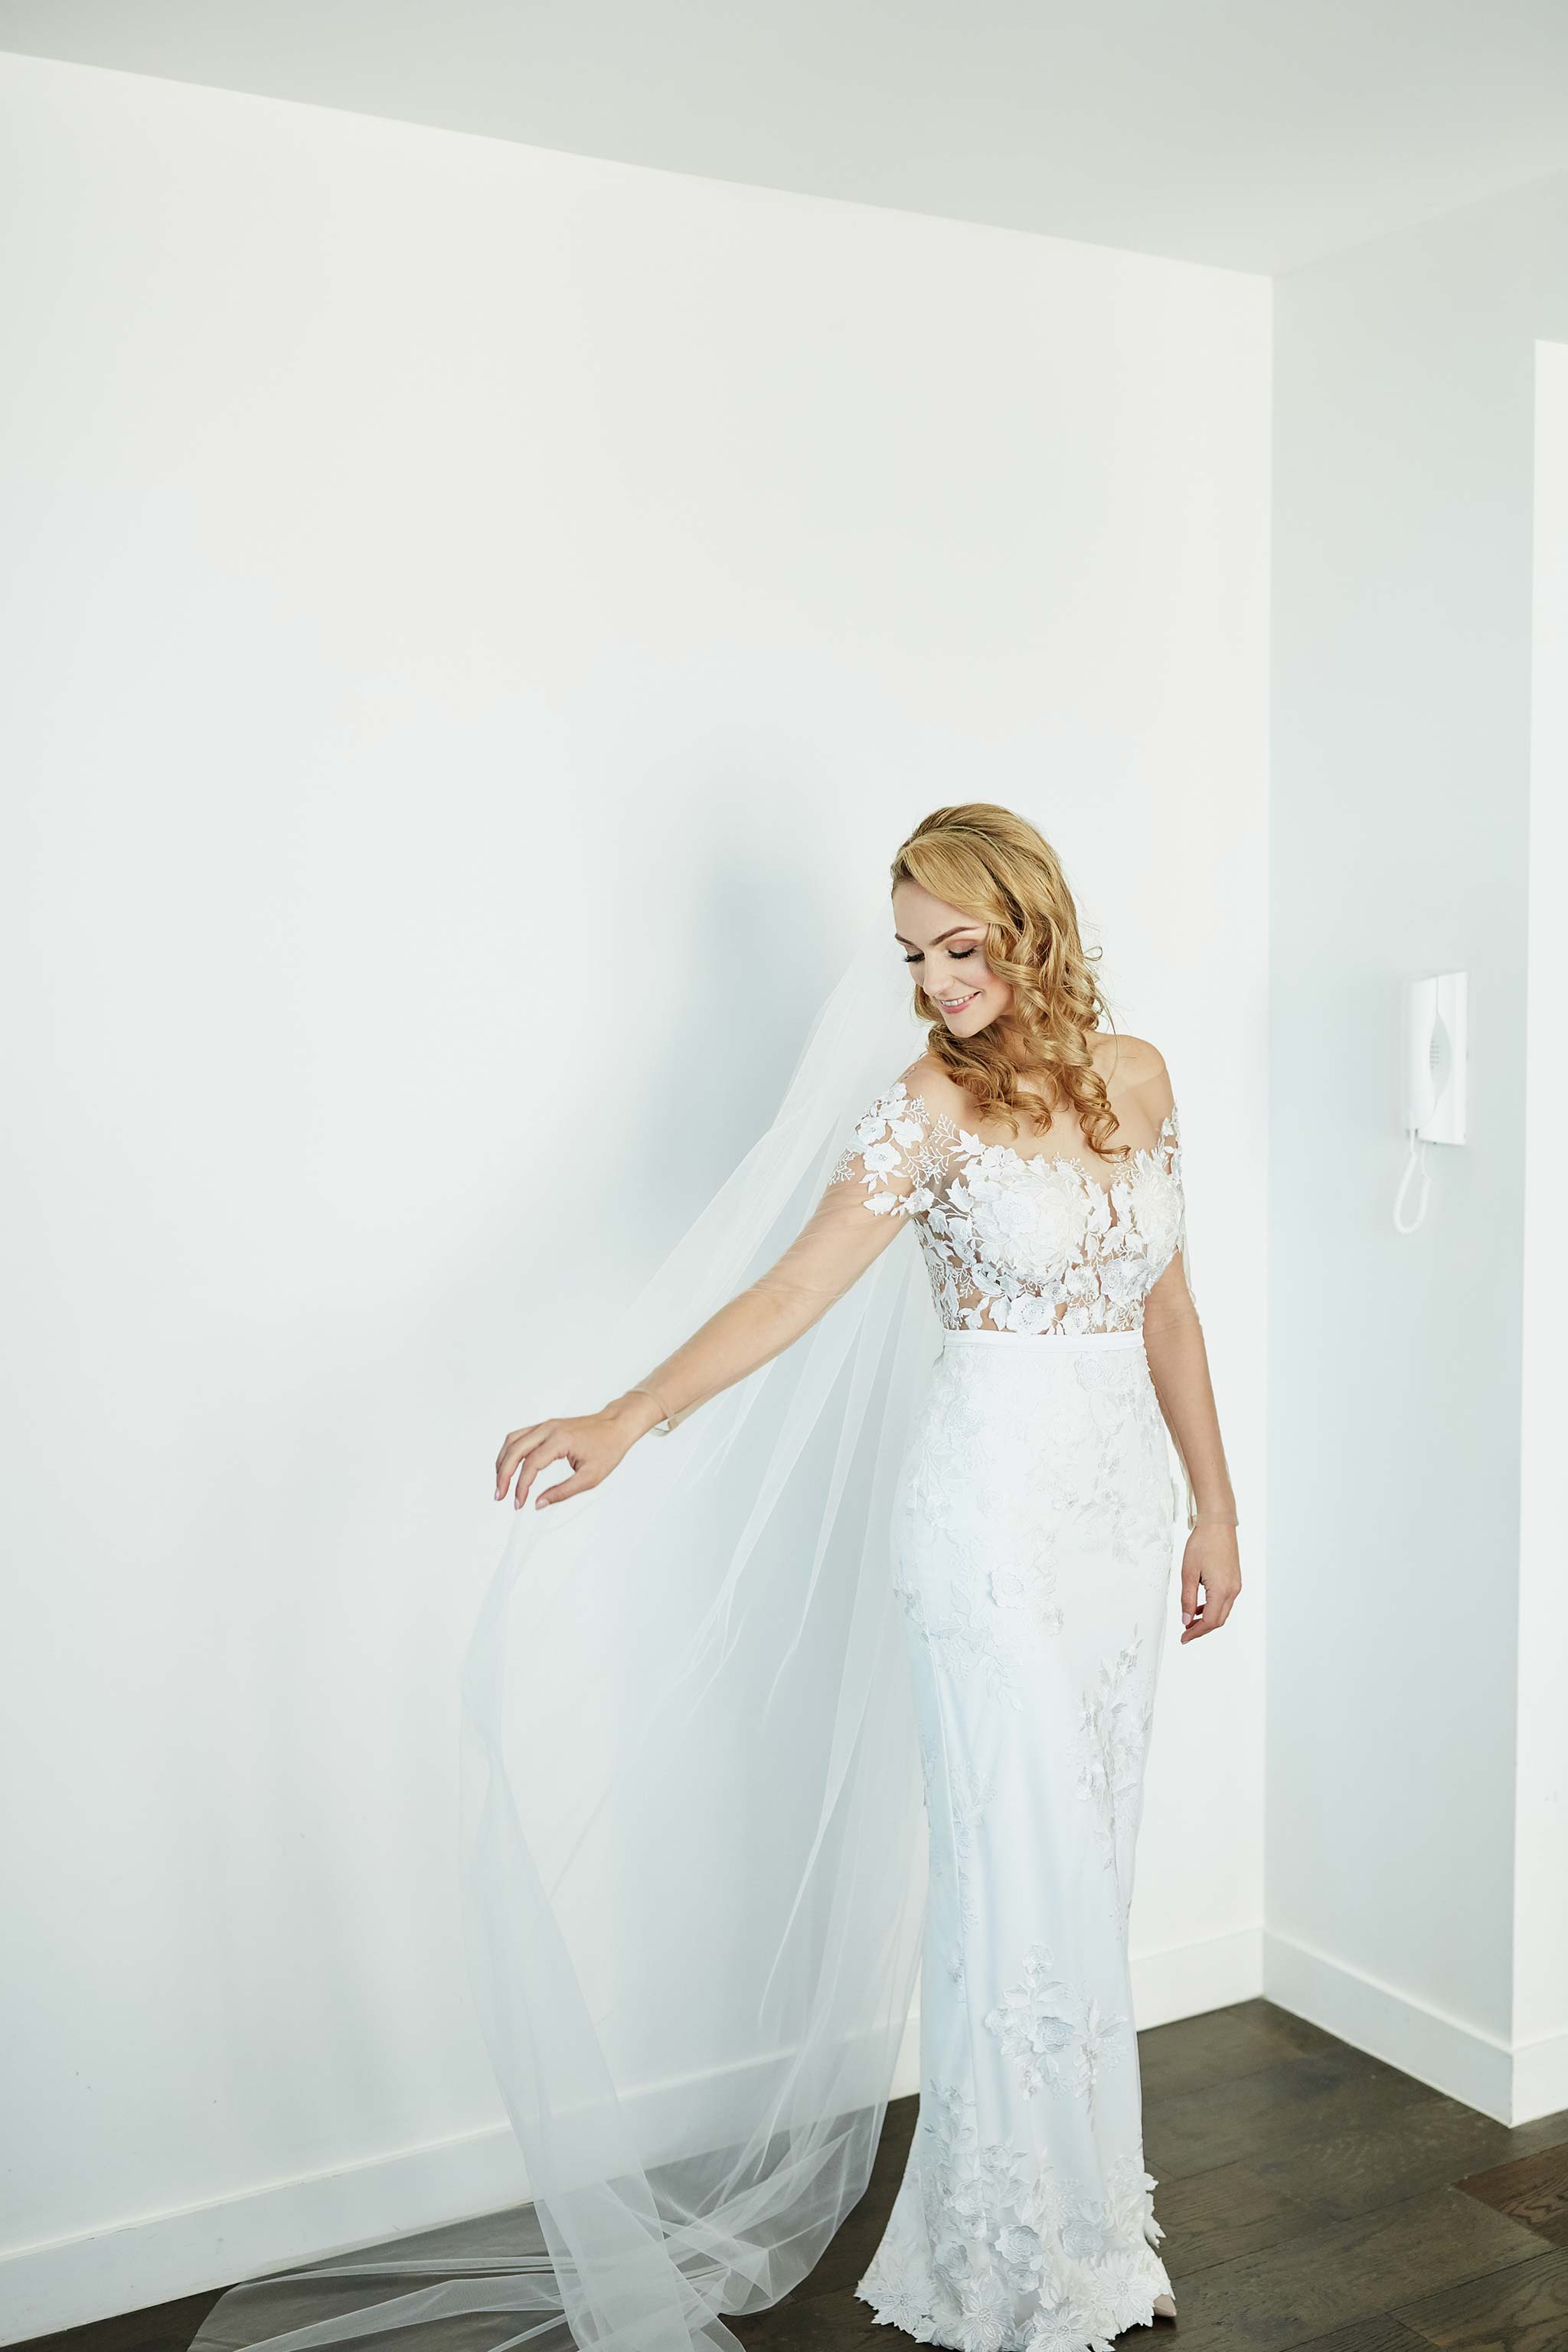 Melbourne-Wedding-Photographer-service-apartment-getting-ready-white